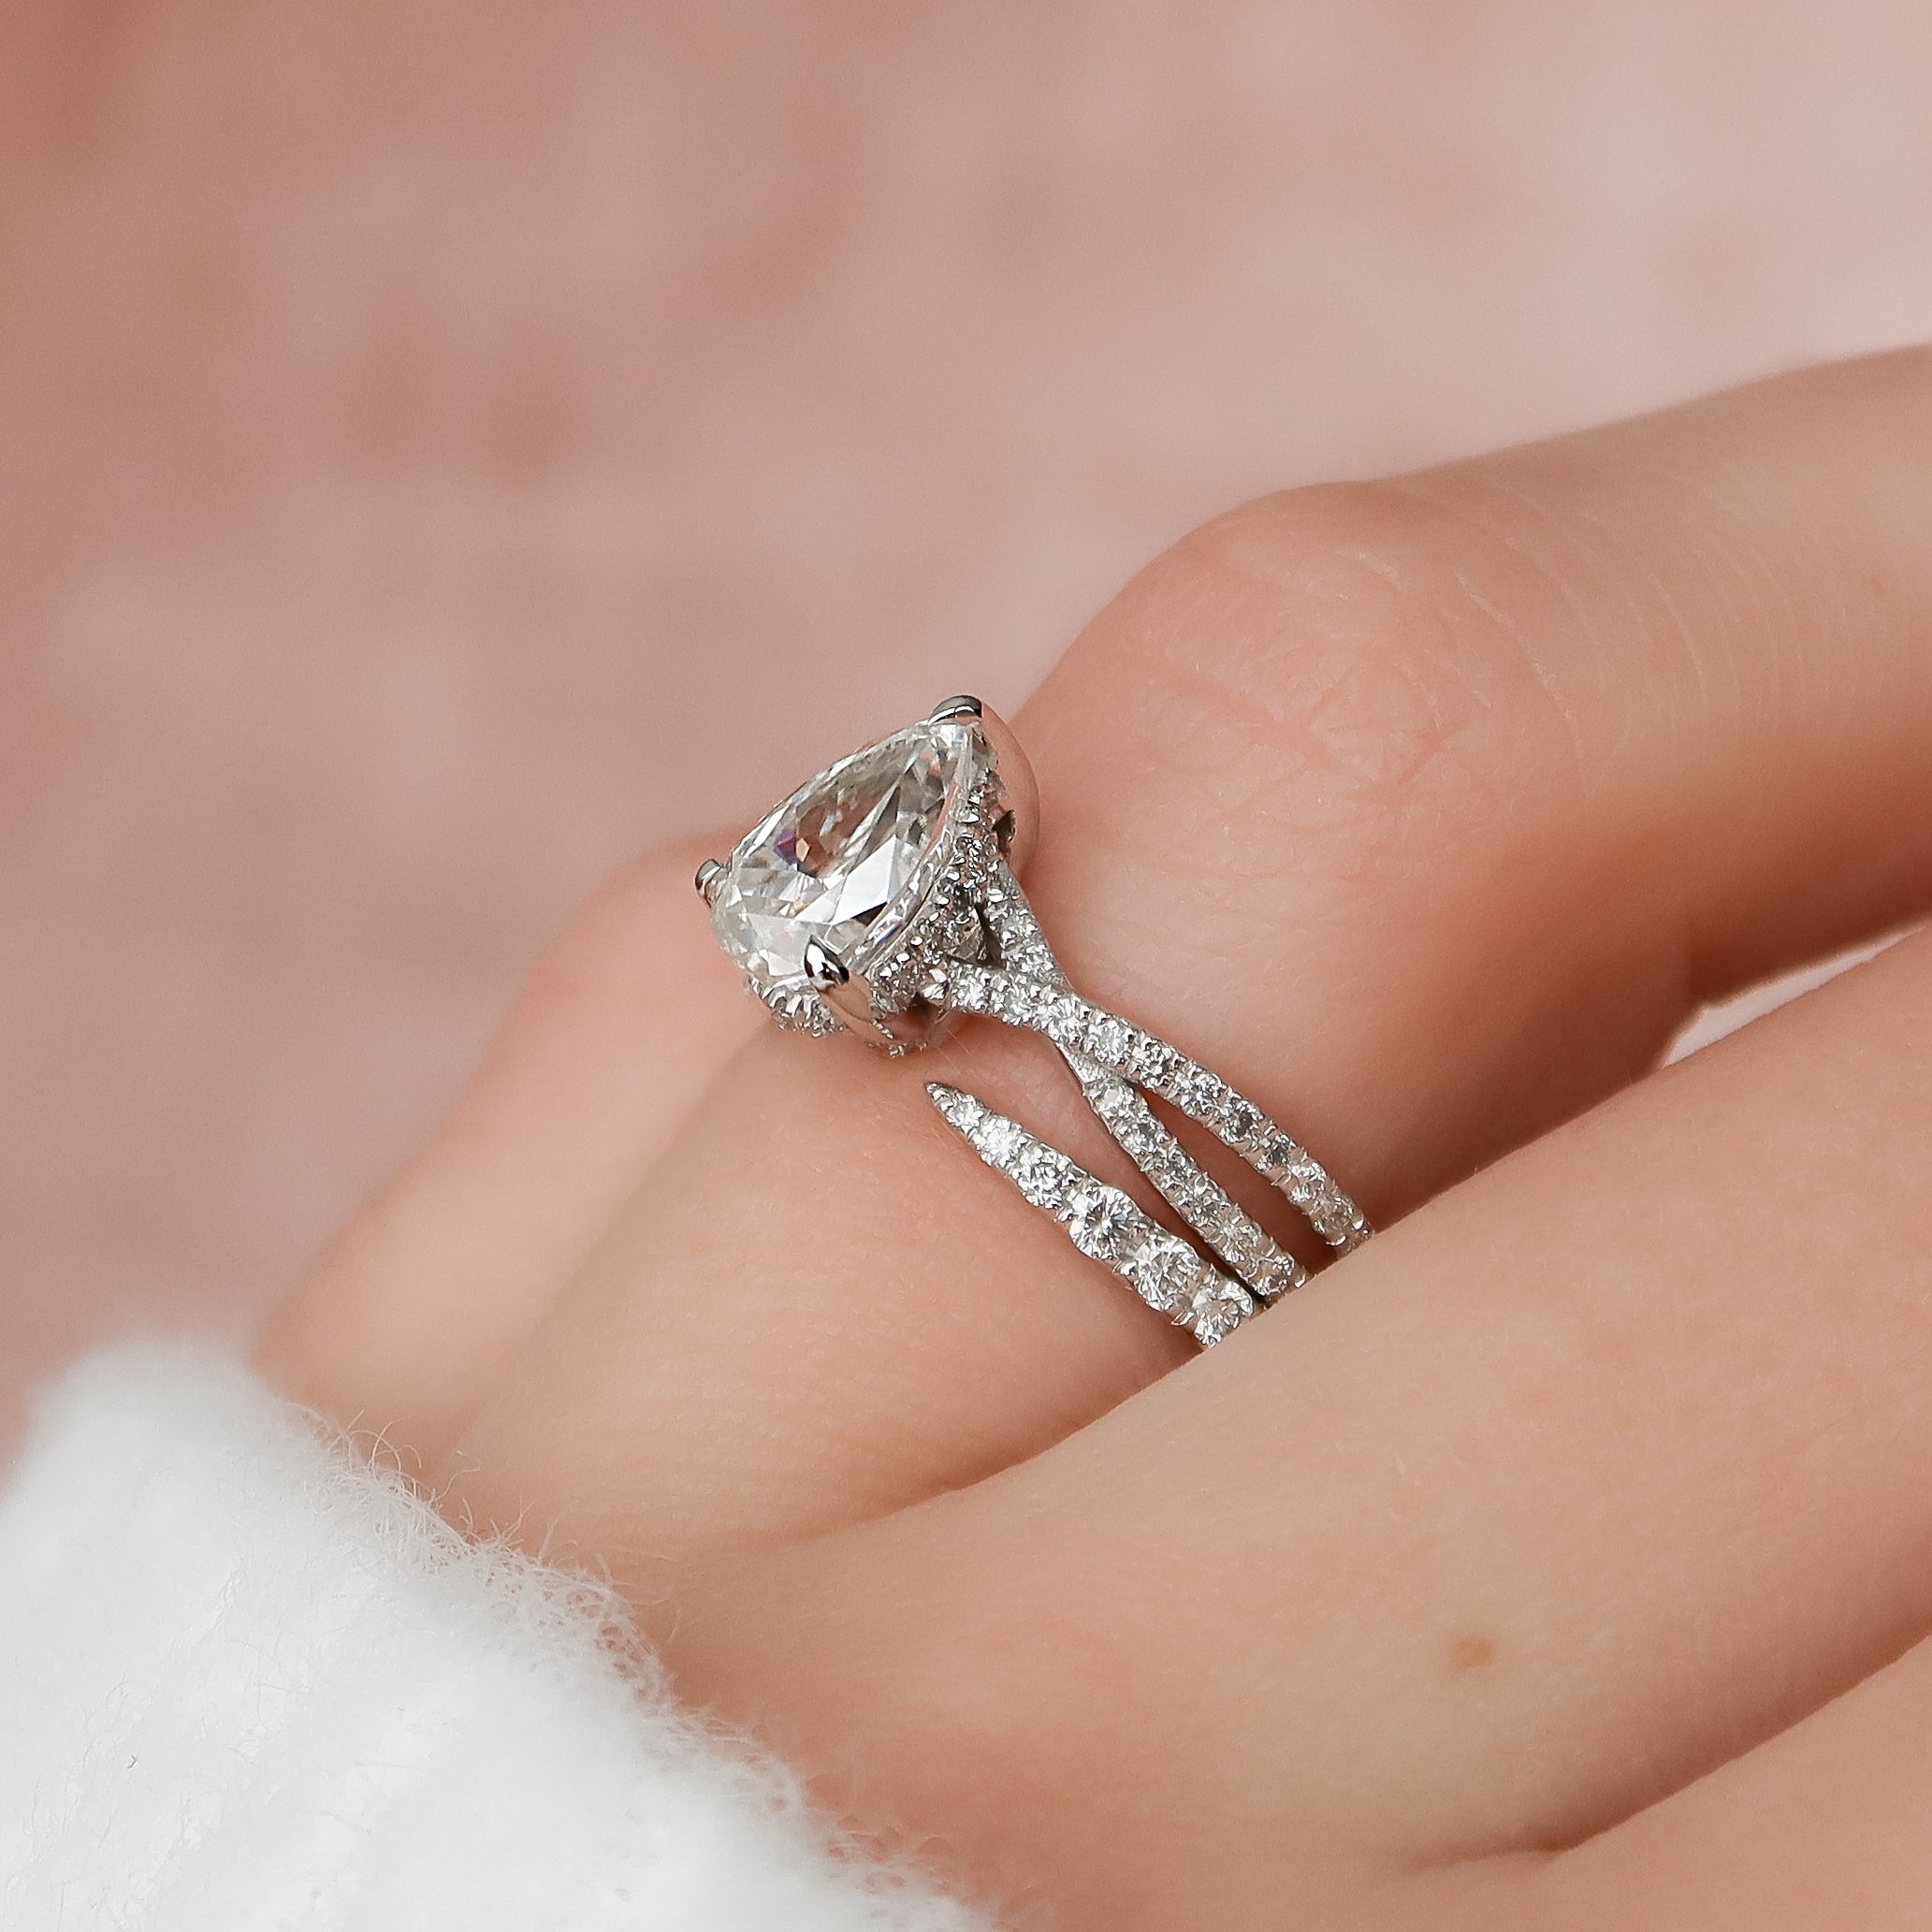 The Best Pear Shaped Diamond Ring Settings (With Beautiful Photos)